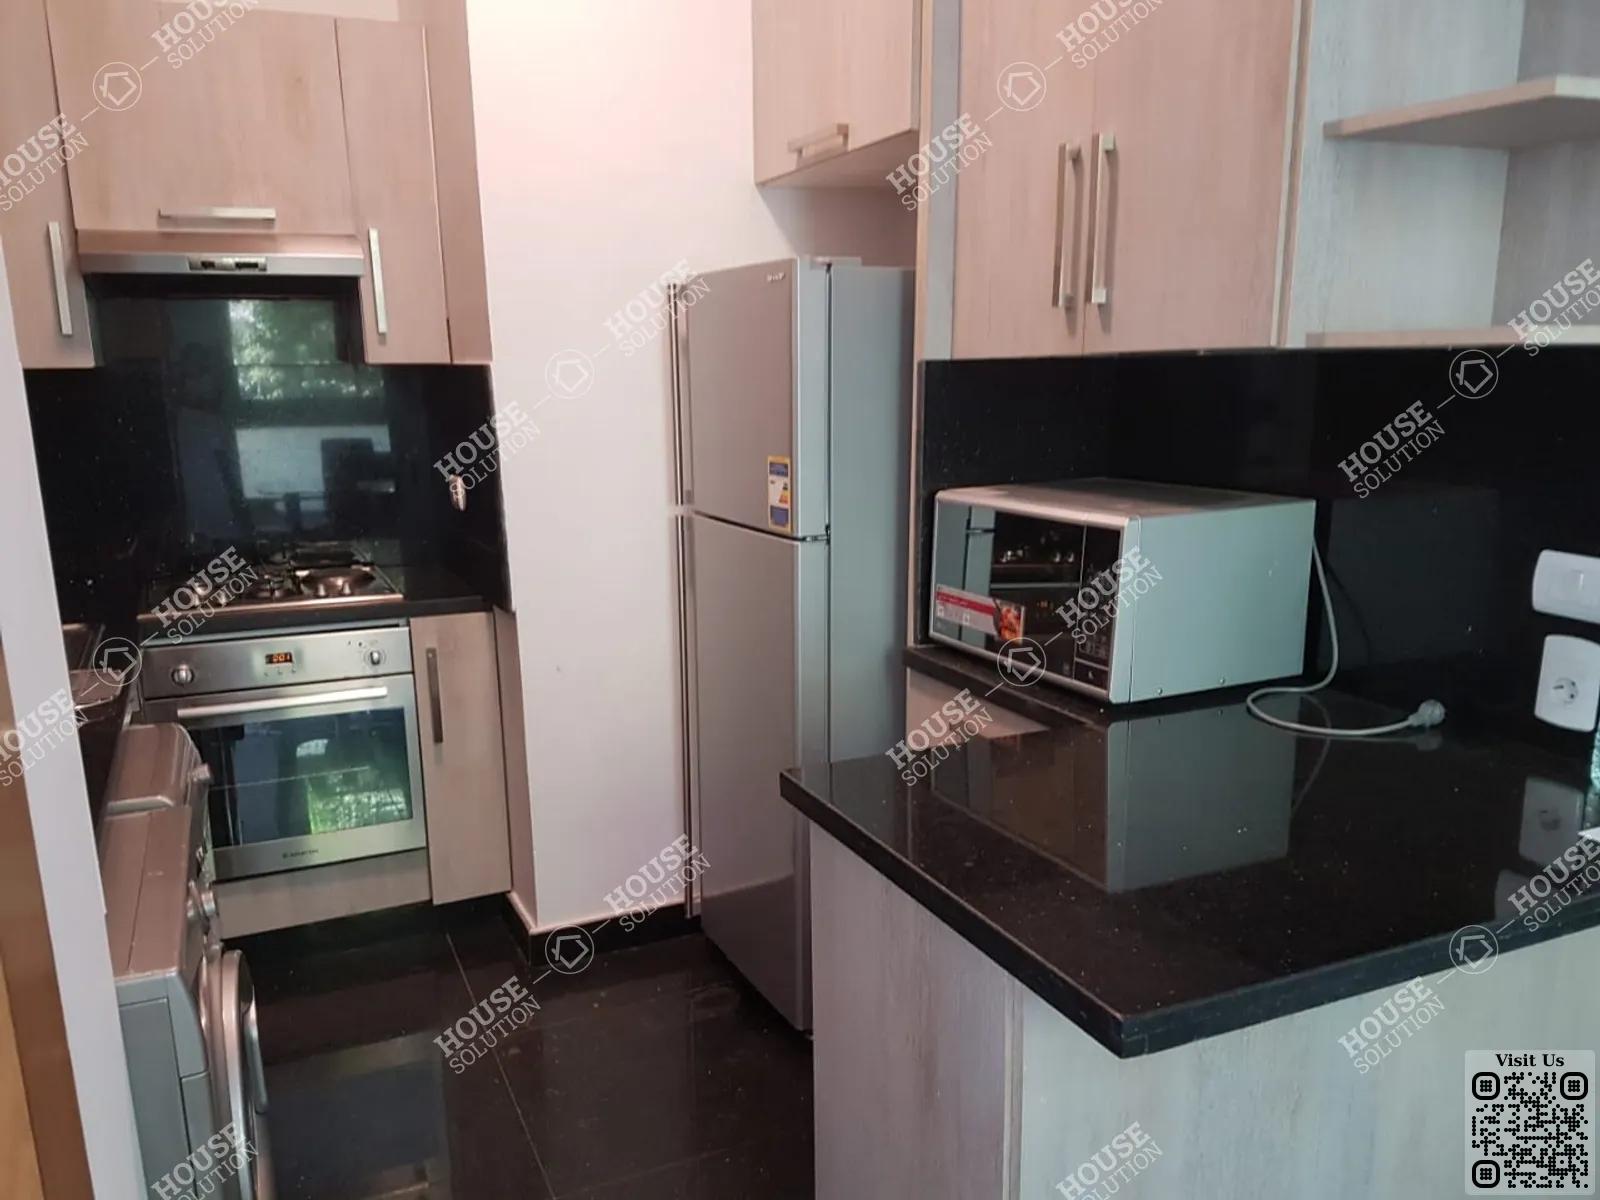 KITCHEN  @ Apartments For Rent In Maadi Maadi Sarayat Area: 180 m² consists of 2 Bedrooms 3 Bathrooms Modern furnished 5 stars #4347-1